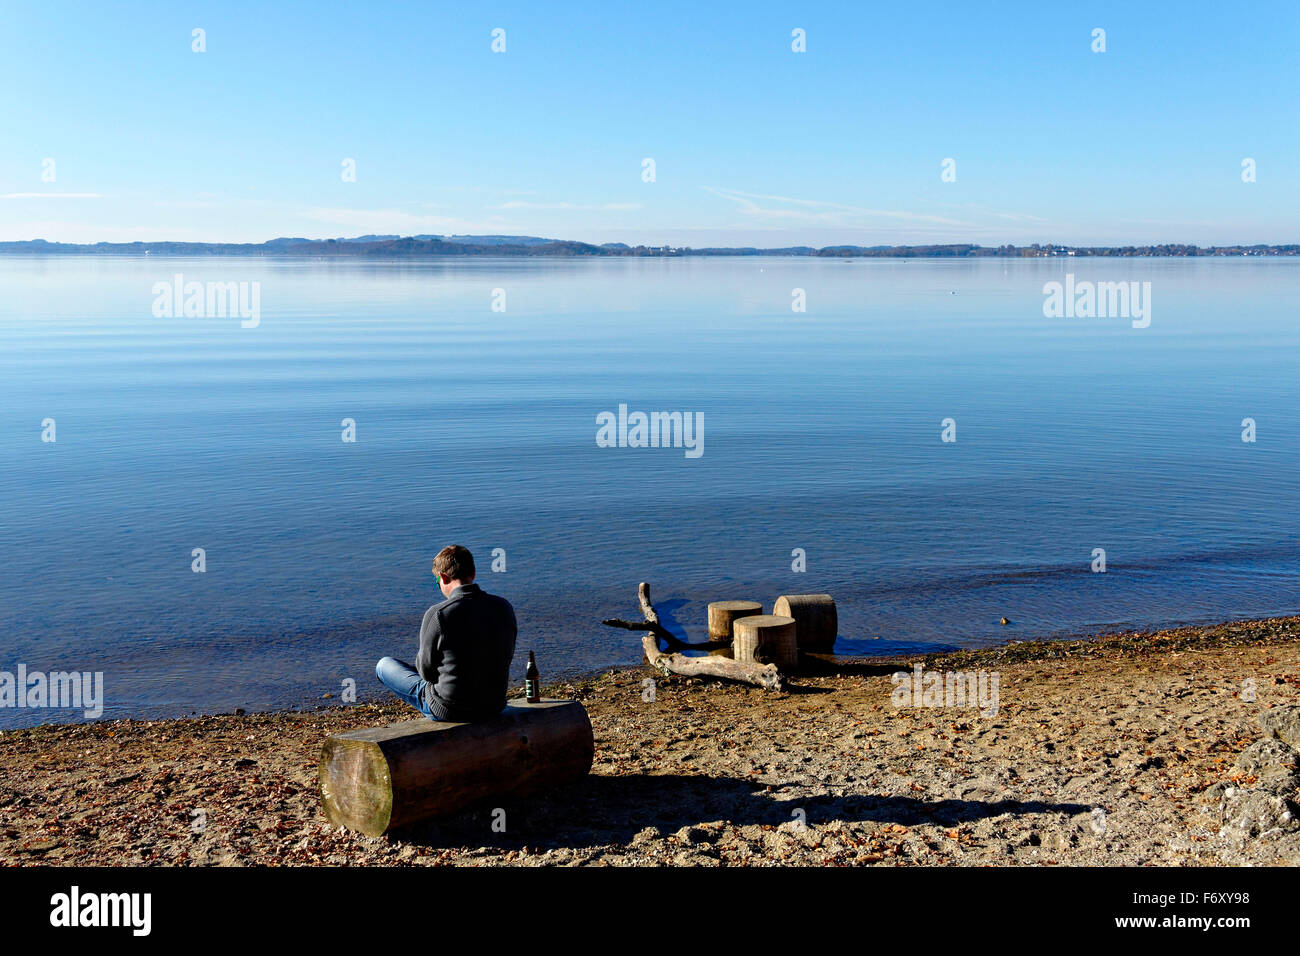 Man sitting on a wooden log with a beer at the  edge of a lake, Feldwieser Bay, Chiemsee, Upper Bavaria, Germany, Europe. Stock Photo